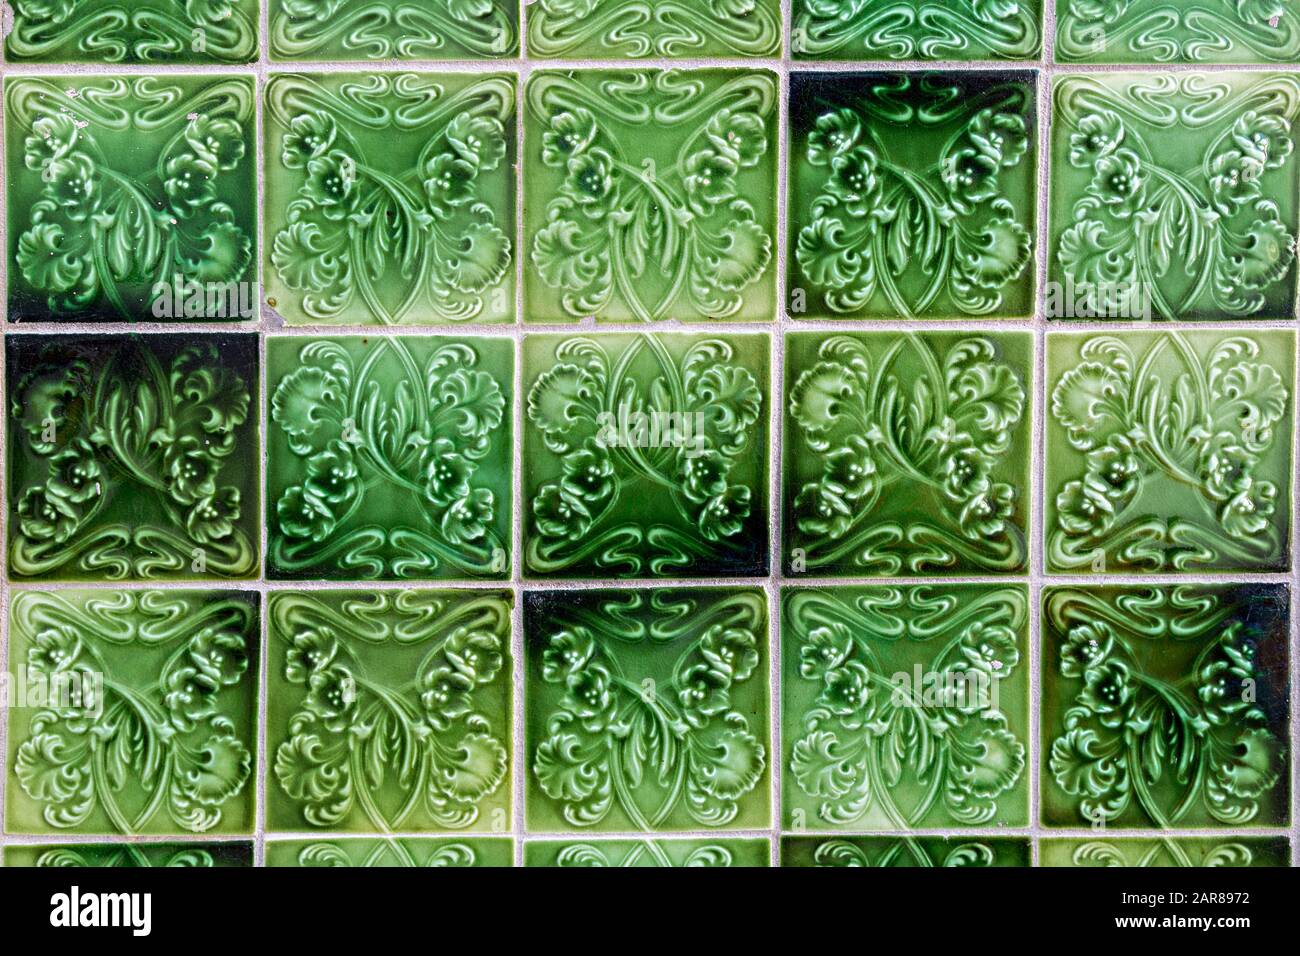 Patterned tiles on wall of house, Lagos, Algarve, Portugal Stock Photo